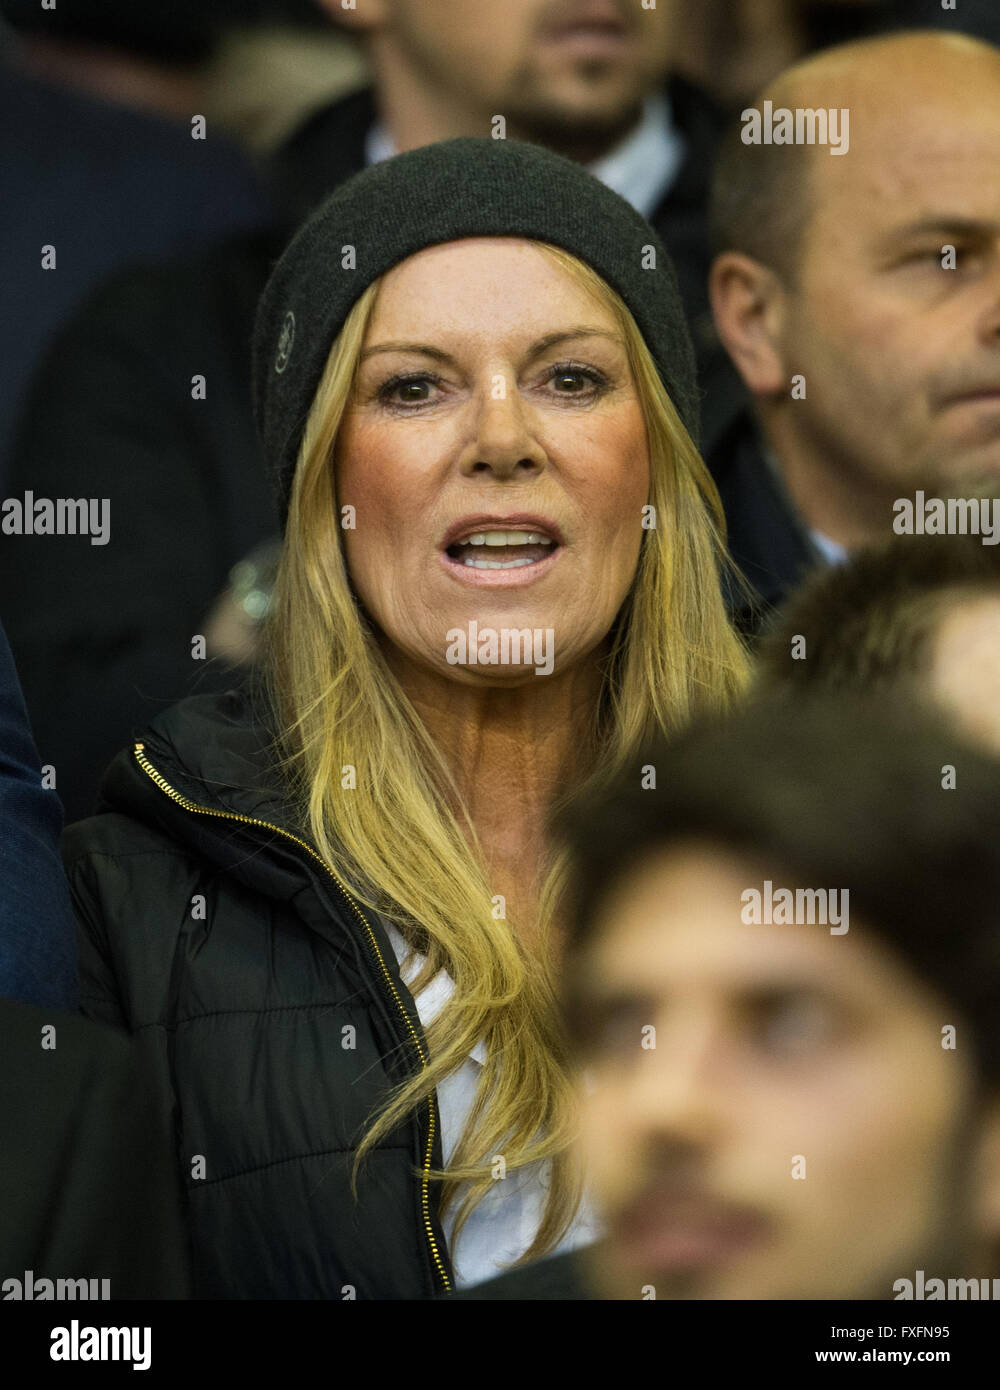 Ulla Klopp, the wife of Liverpool's coach Juergen Klopp, is seen at the ...